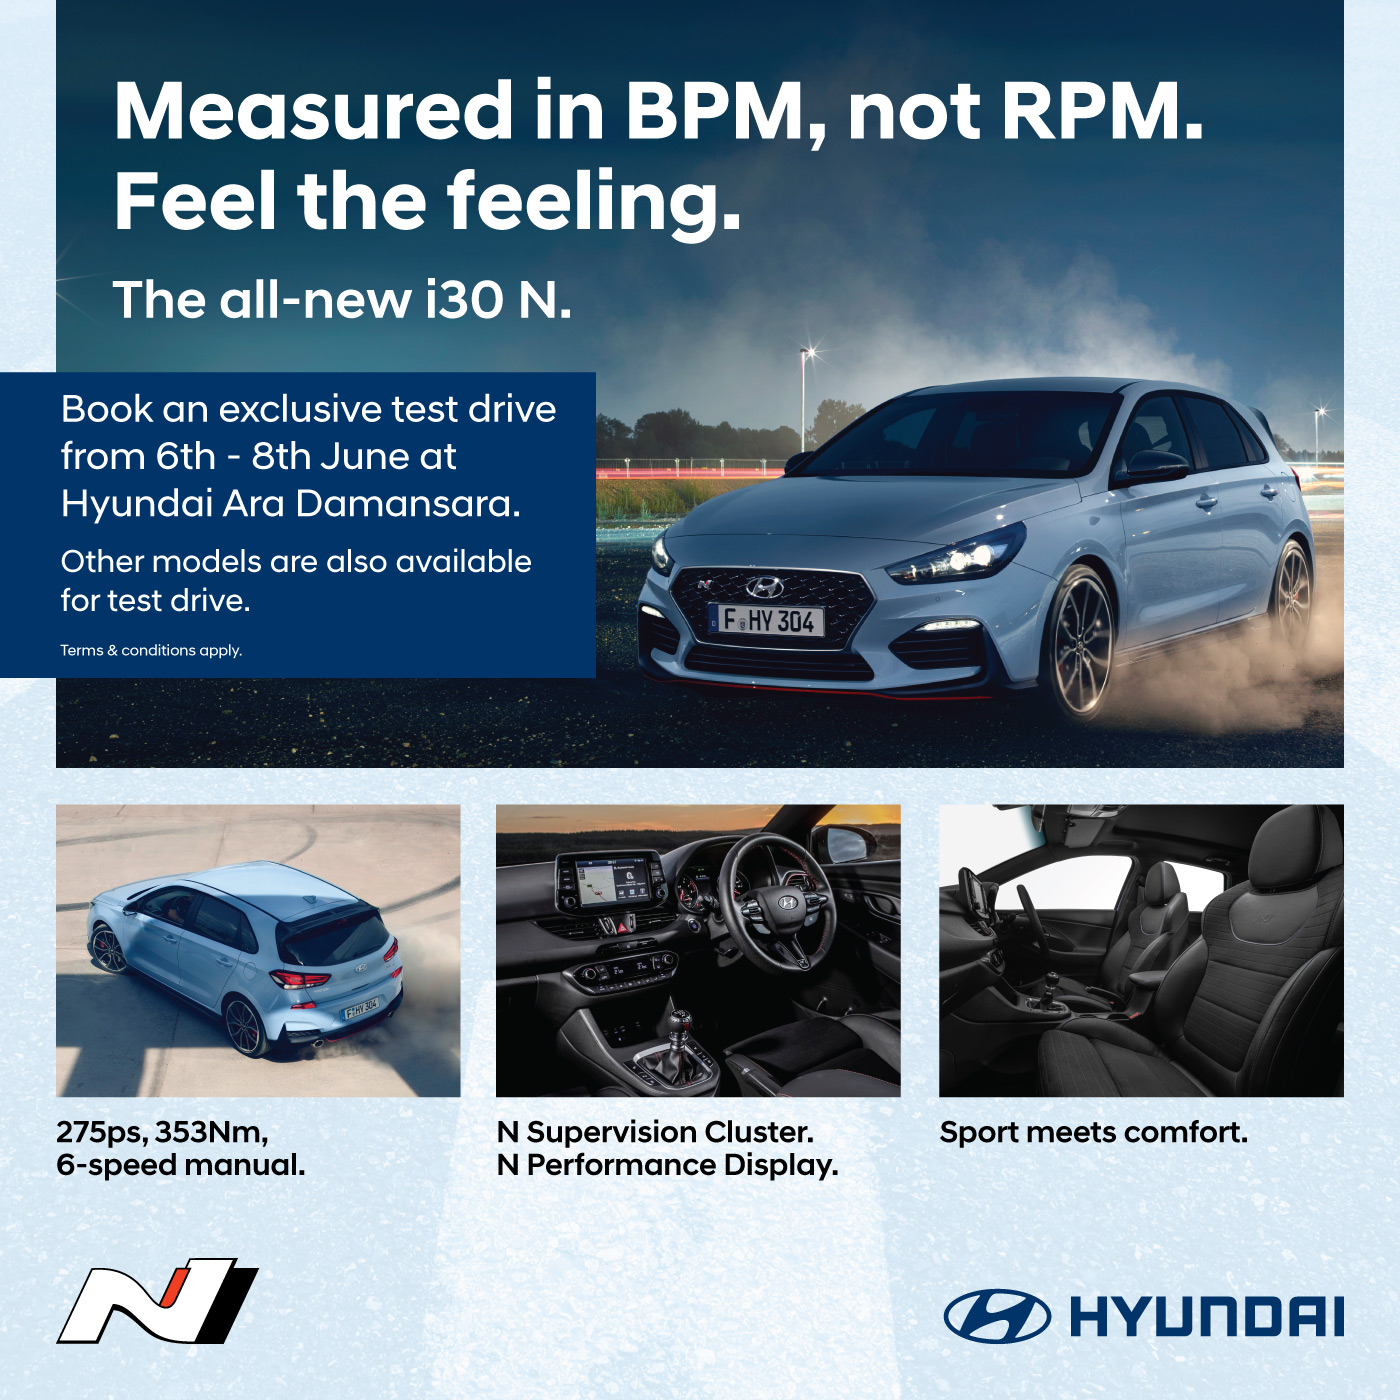 The all-new i30N | Measured in BPM, not RPM. Feel the feeling. | Book an exclusive test drive from 6th - 8th June at Hyundai Ara Damansara. | Other models are also available for test drive.